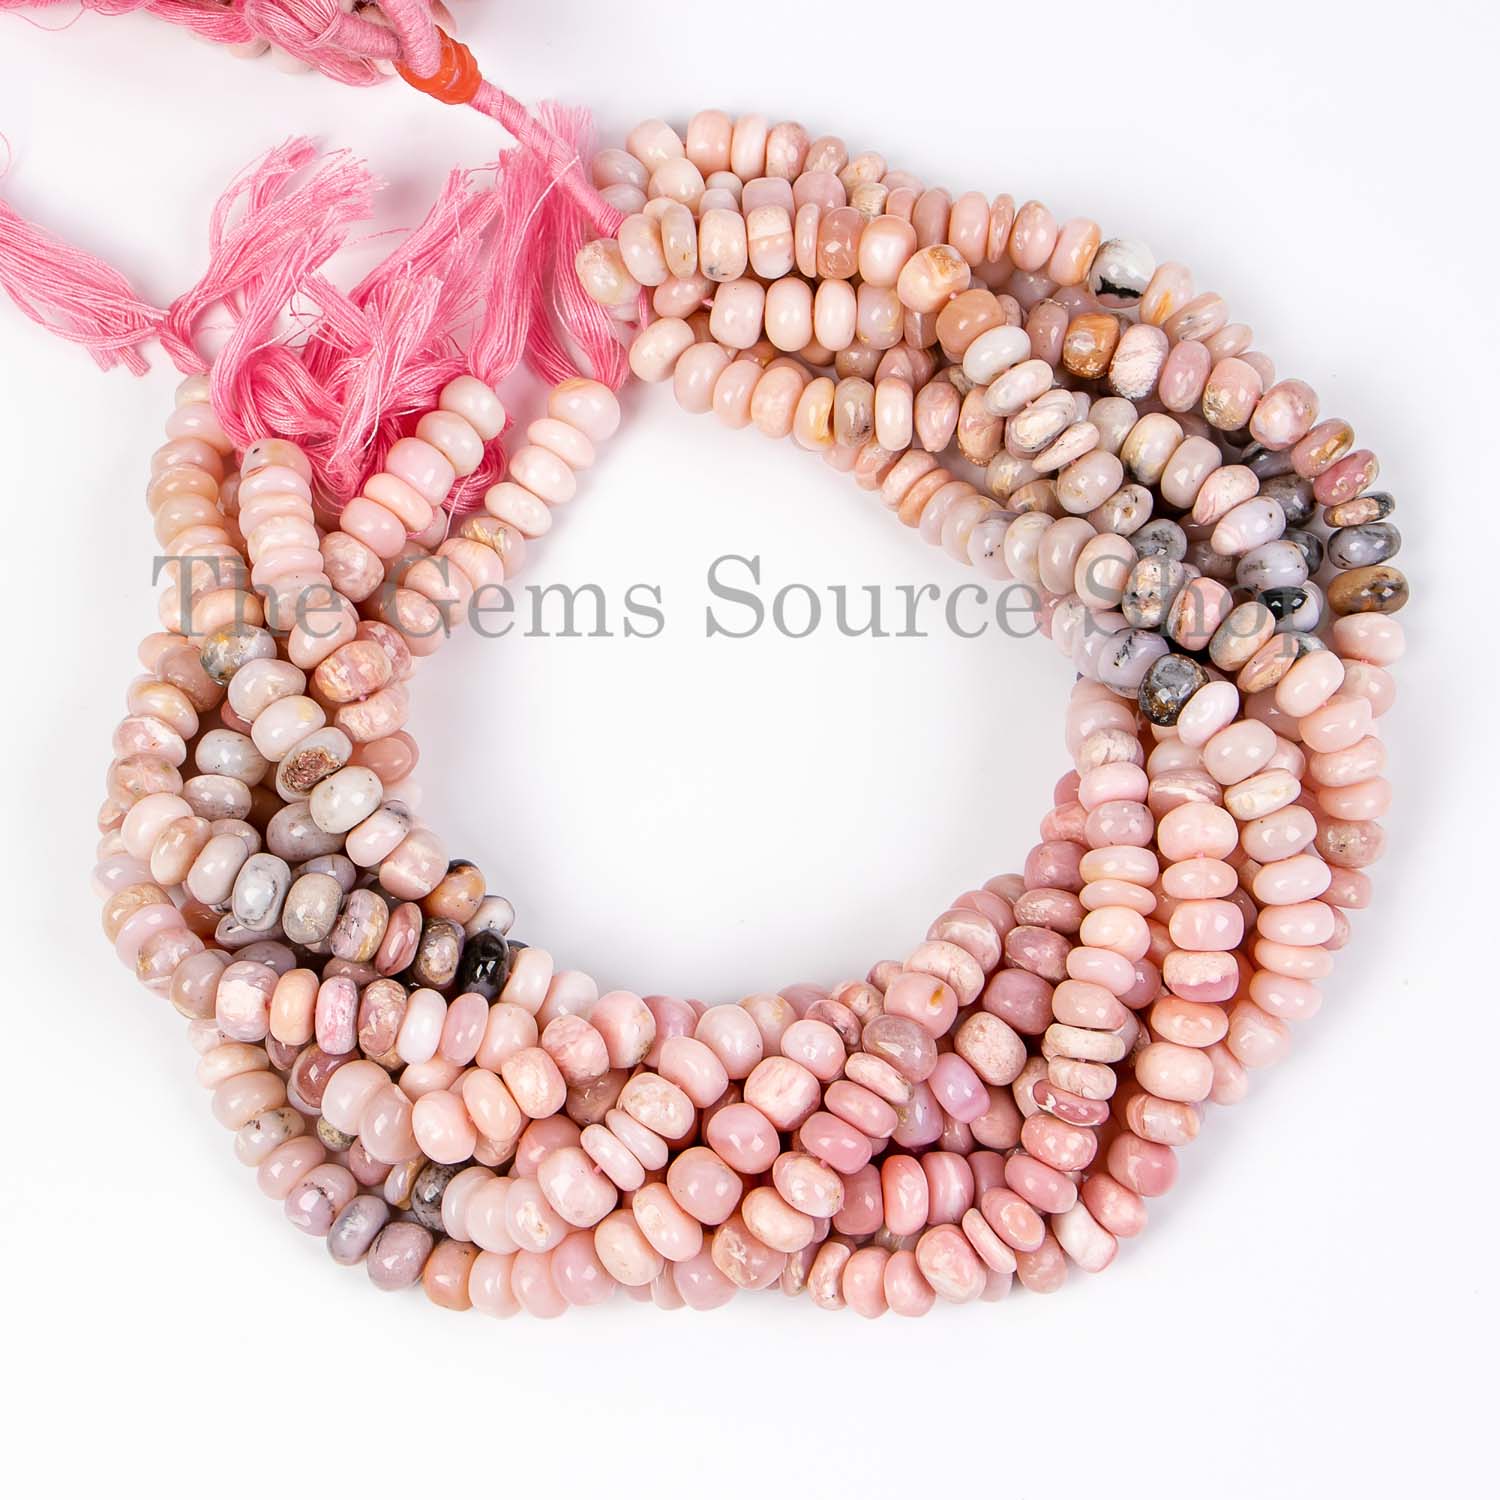 Pink Opal Beads, Pink Opal Rondelle Beads, Pink Opal Smooth Beads, Pink Opal Gemstone Beads